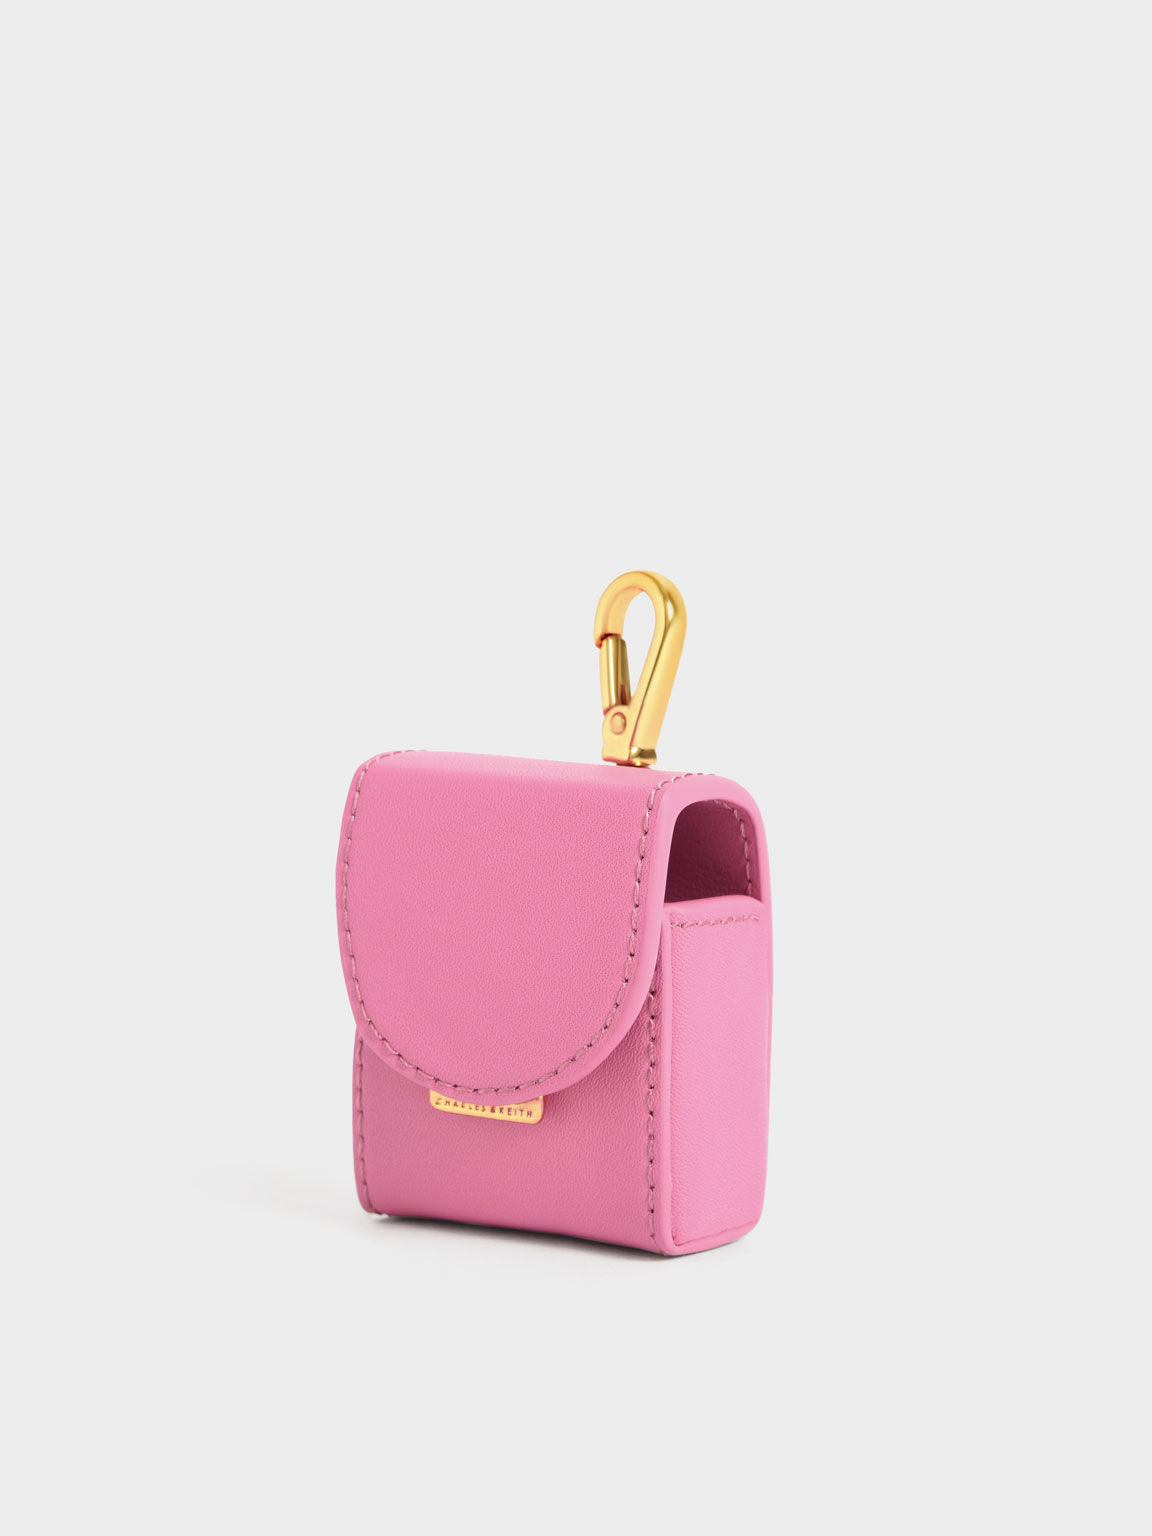 AirPods Pouch, Pink, hi-res